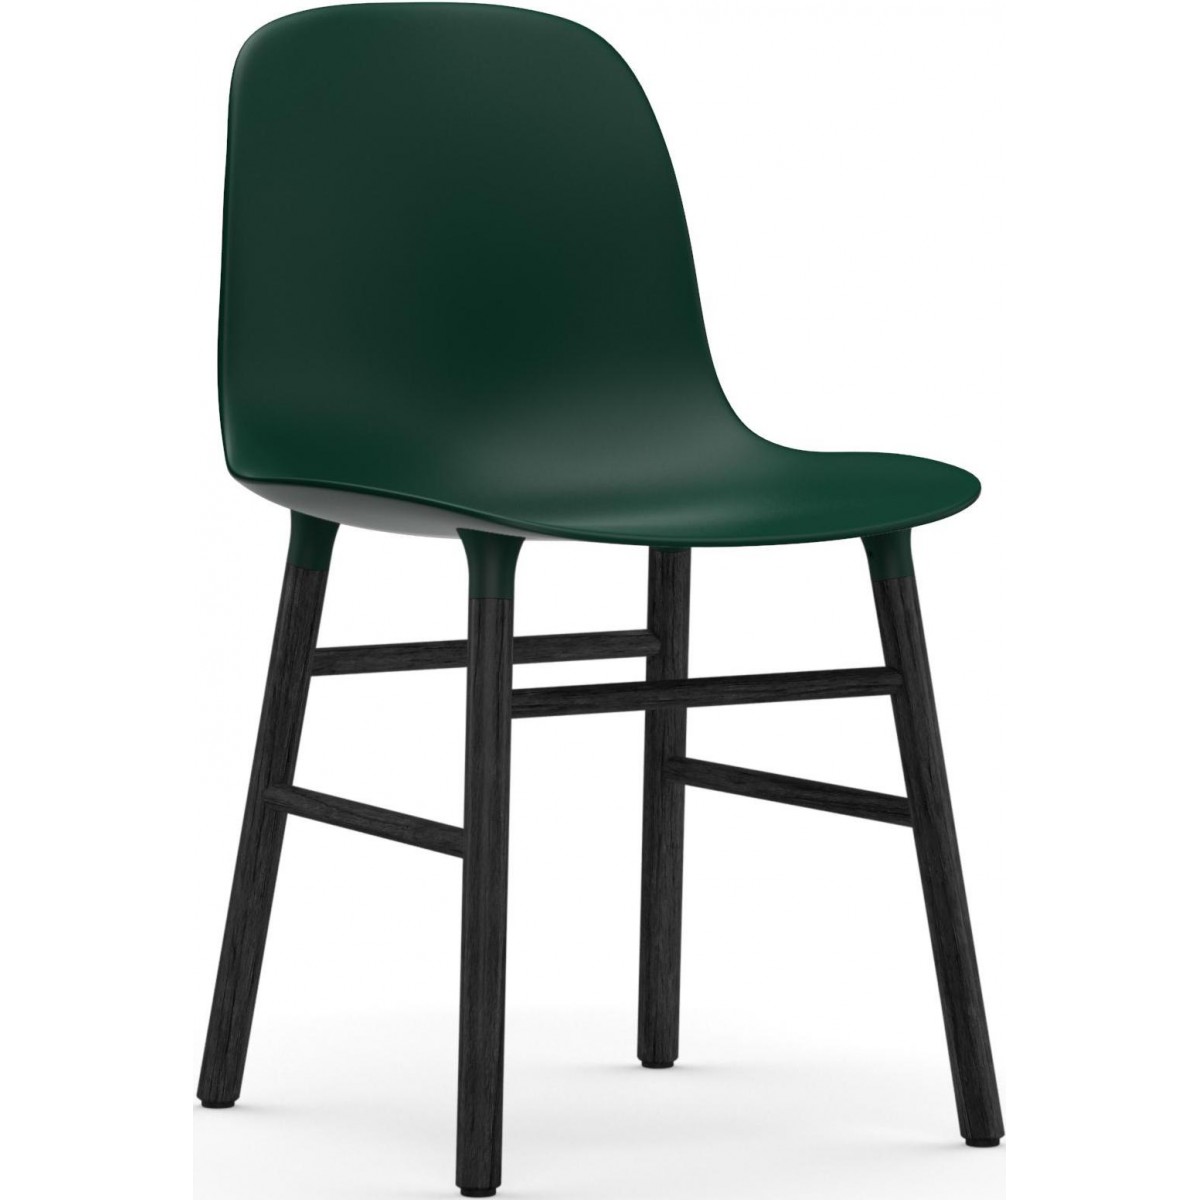 Green / Black lacquered oak – Form Chair